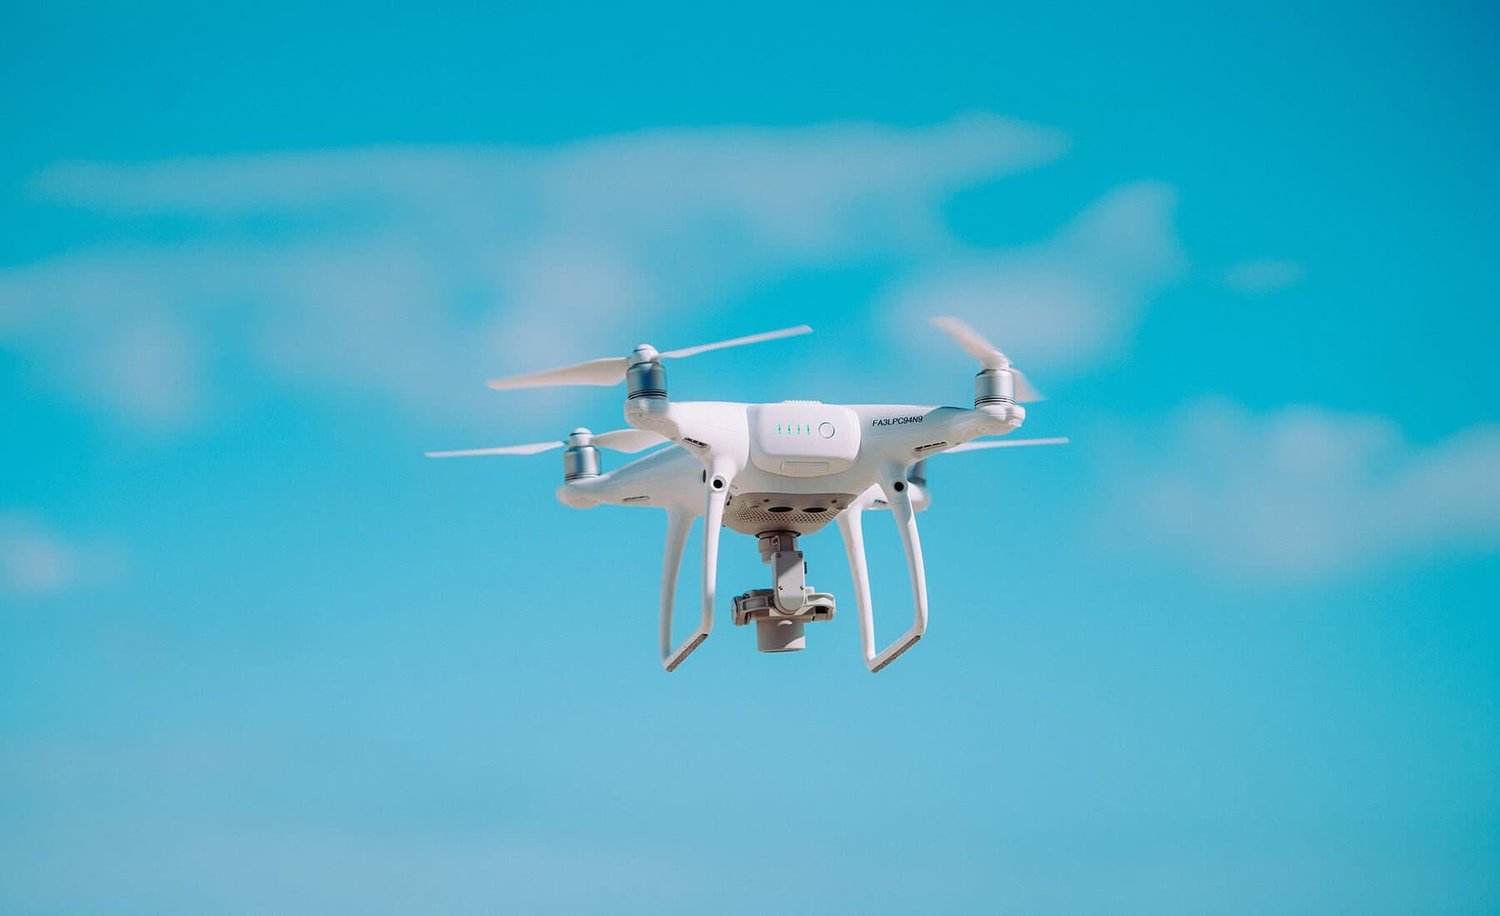 Could Delivery Drones Be the Next Tech Privacy Violation? 88% of ...